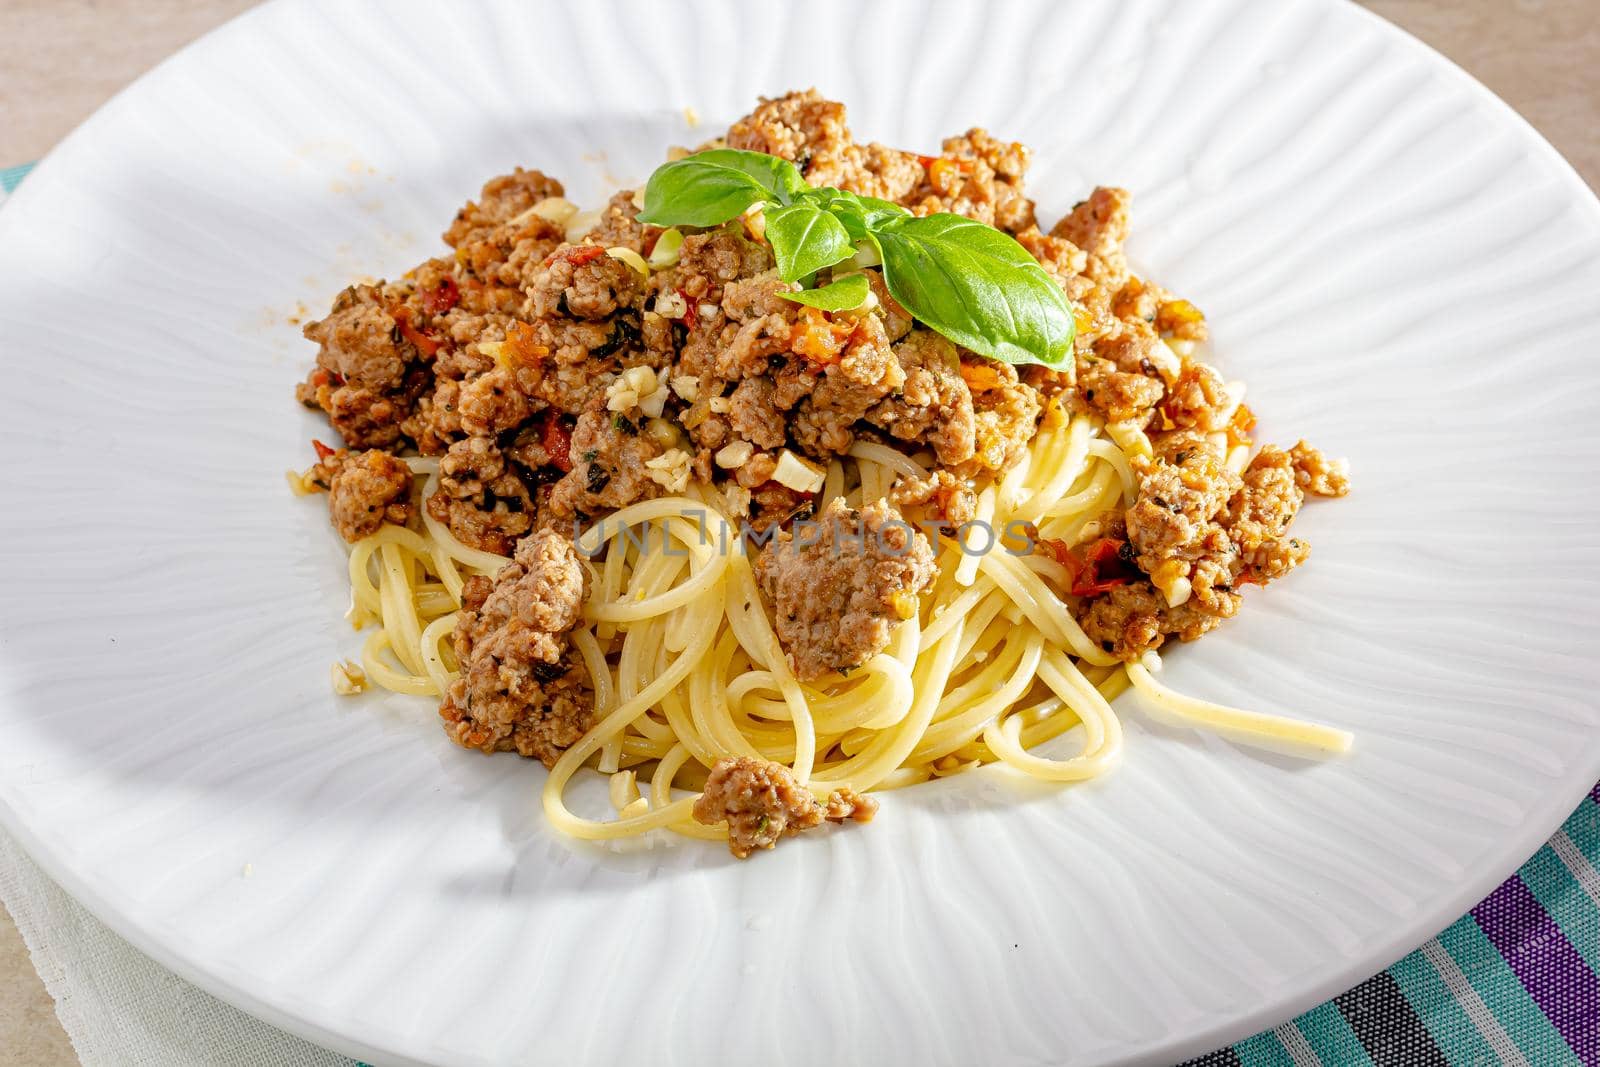 Rich spicy Italian spaghetti Bolognaise with parmesan cheese and a fresh green basil leaves viewed from overhead on a white plate in square format.